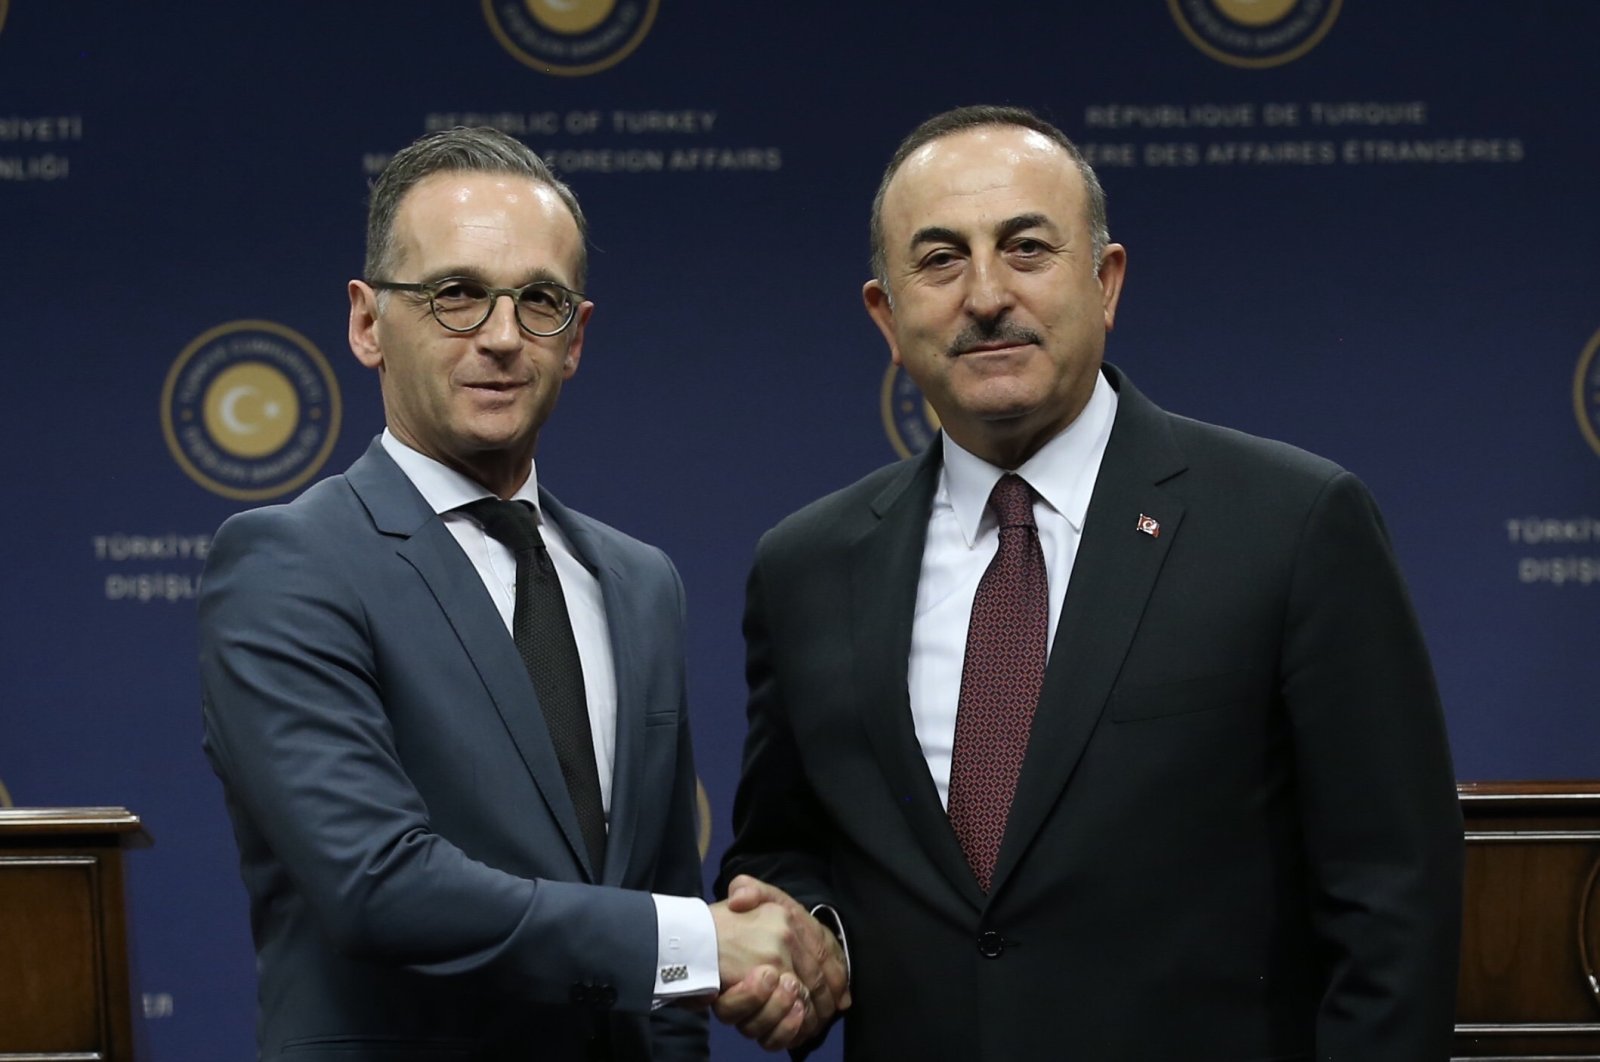 Foreign Minister Mevlüt Çavuşoğlu (R) and his German counterpart Heiko Maas shake hands after a joint press conference, Ankara, Oct. 26, 2019. (AA Photo)